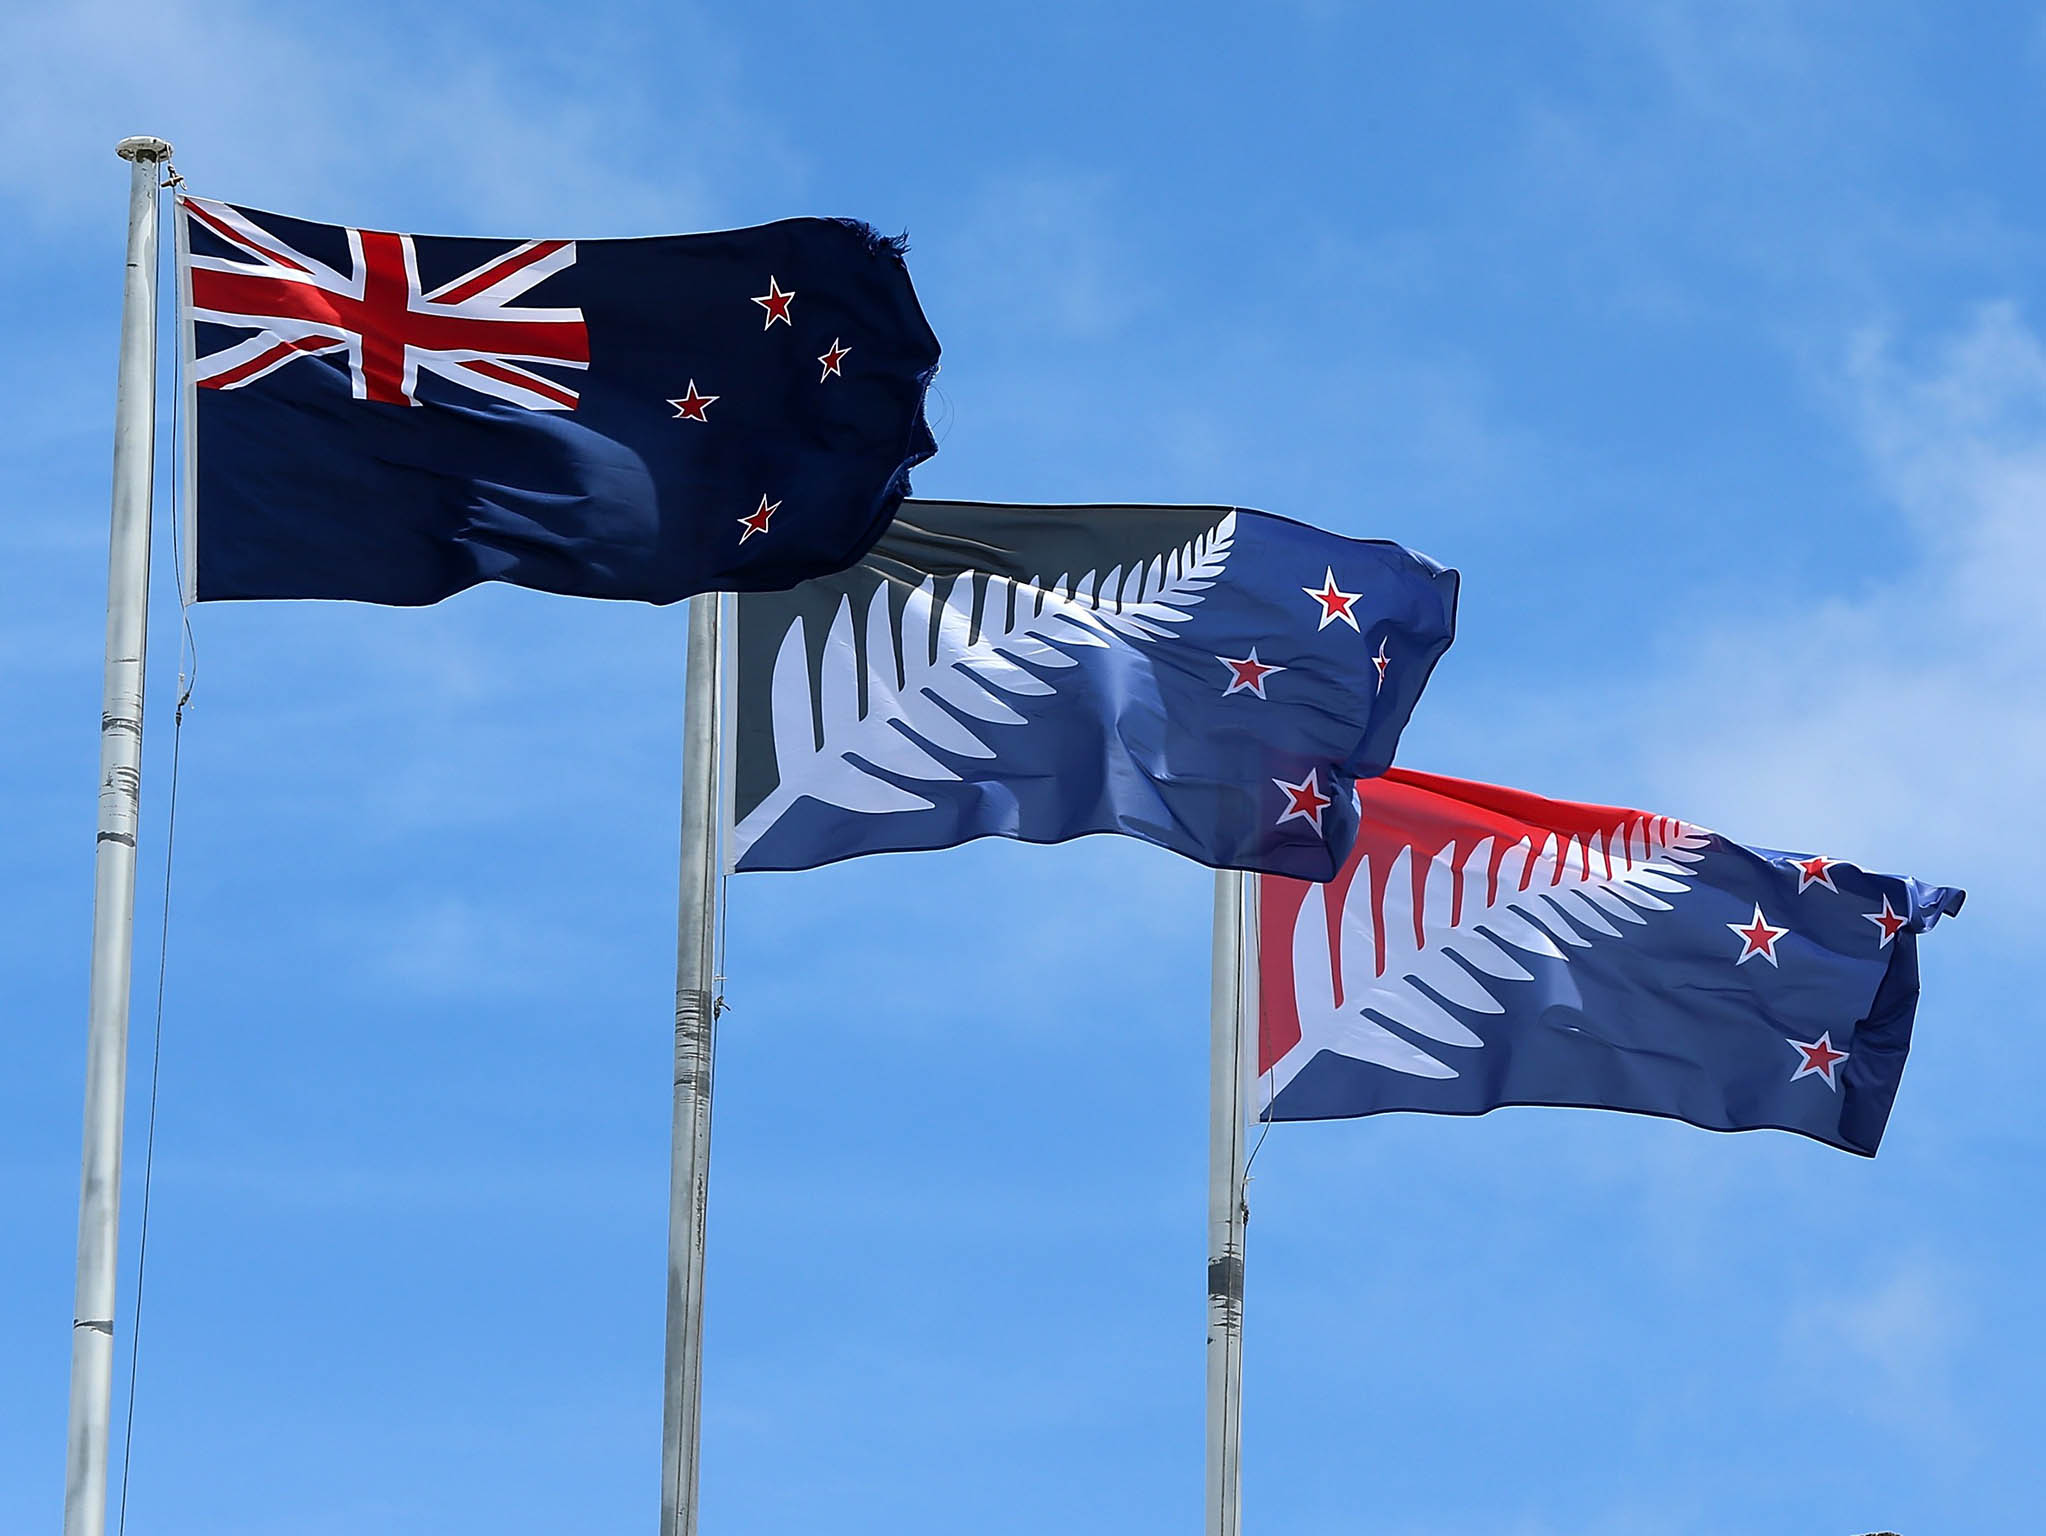 New Zealanders were given the chance to vote on a new flag.